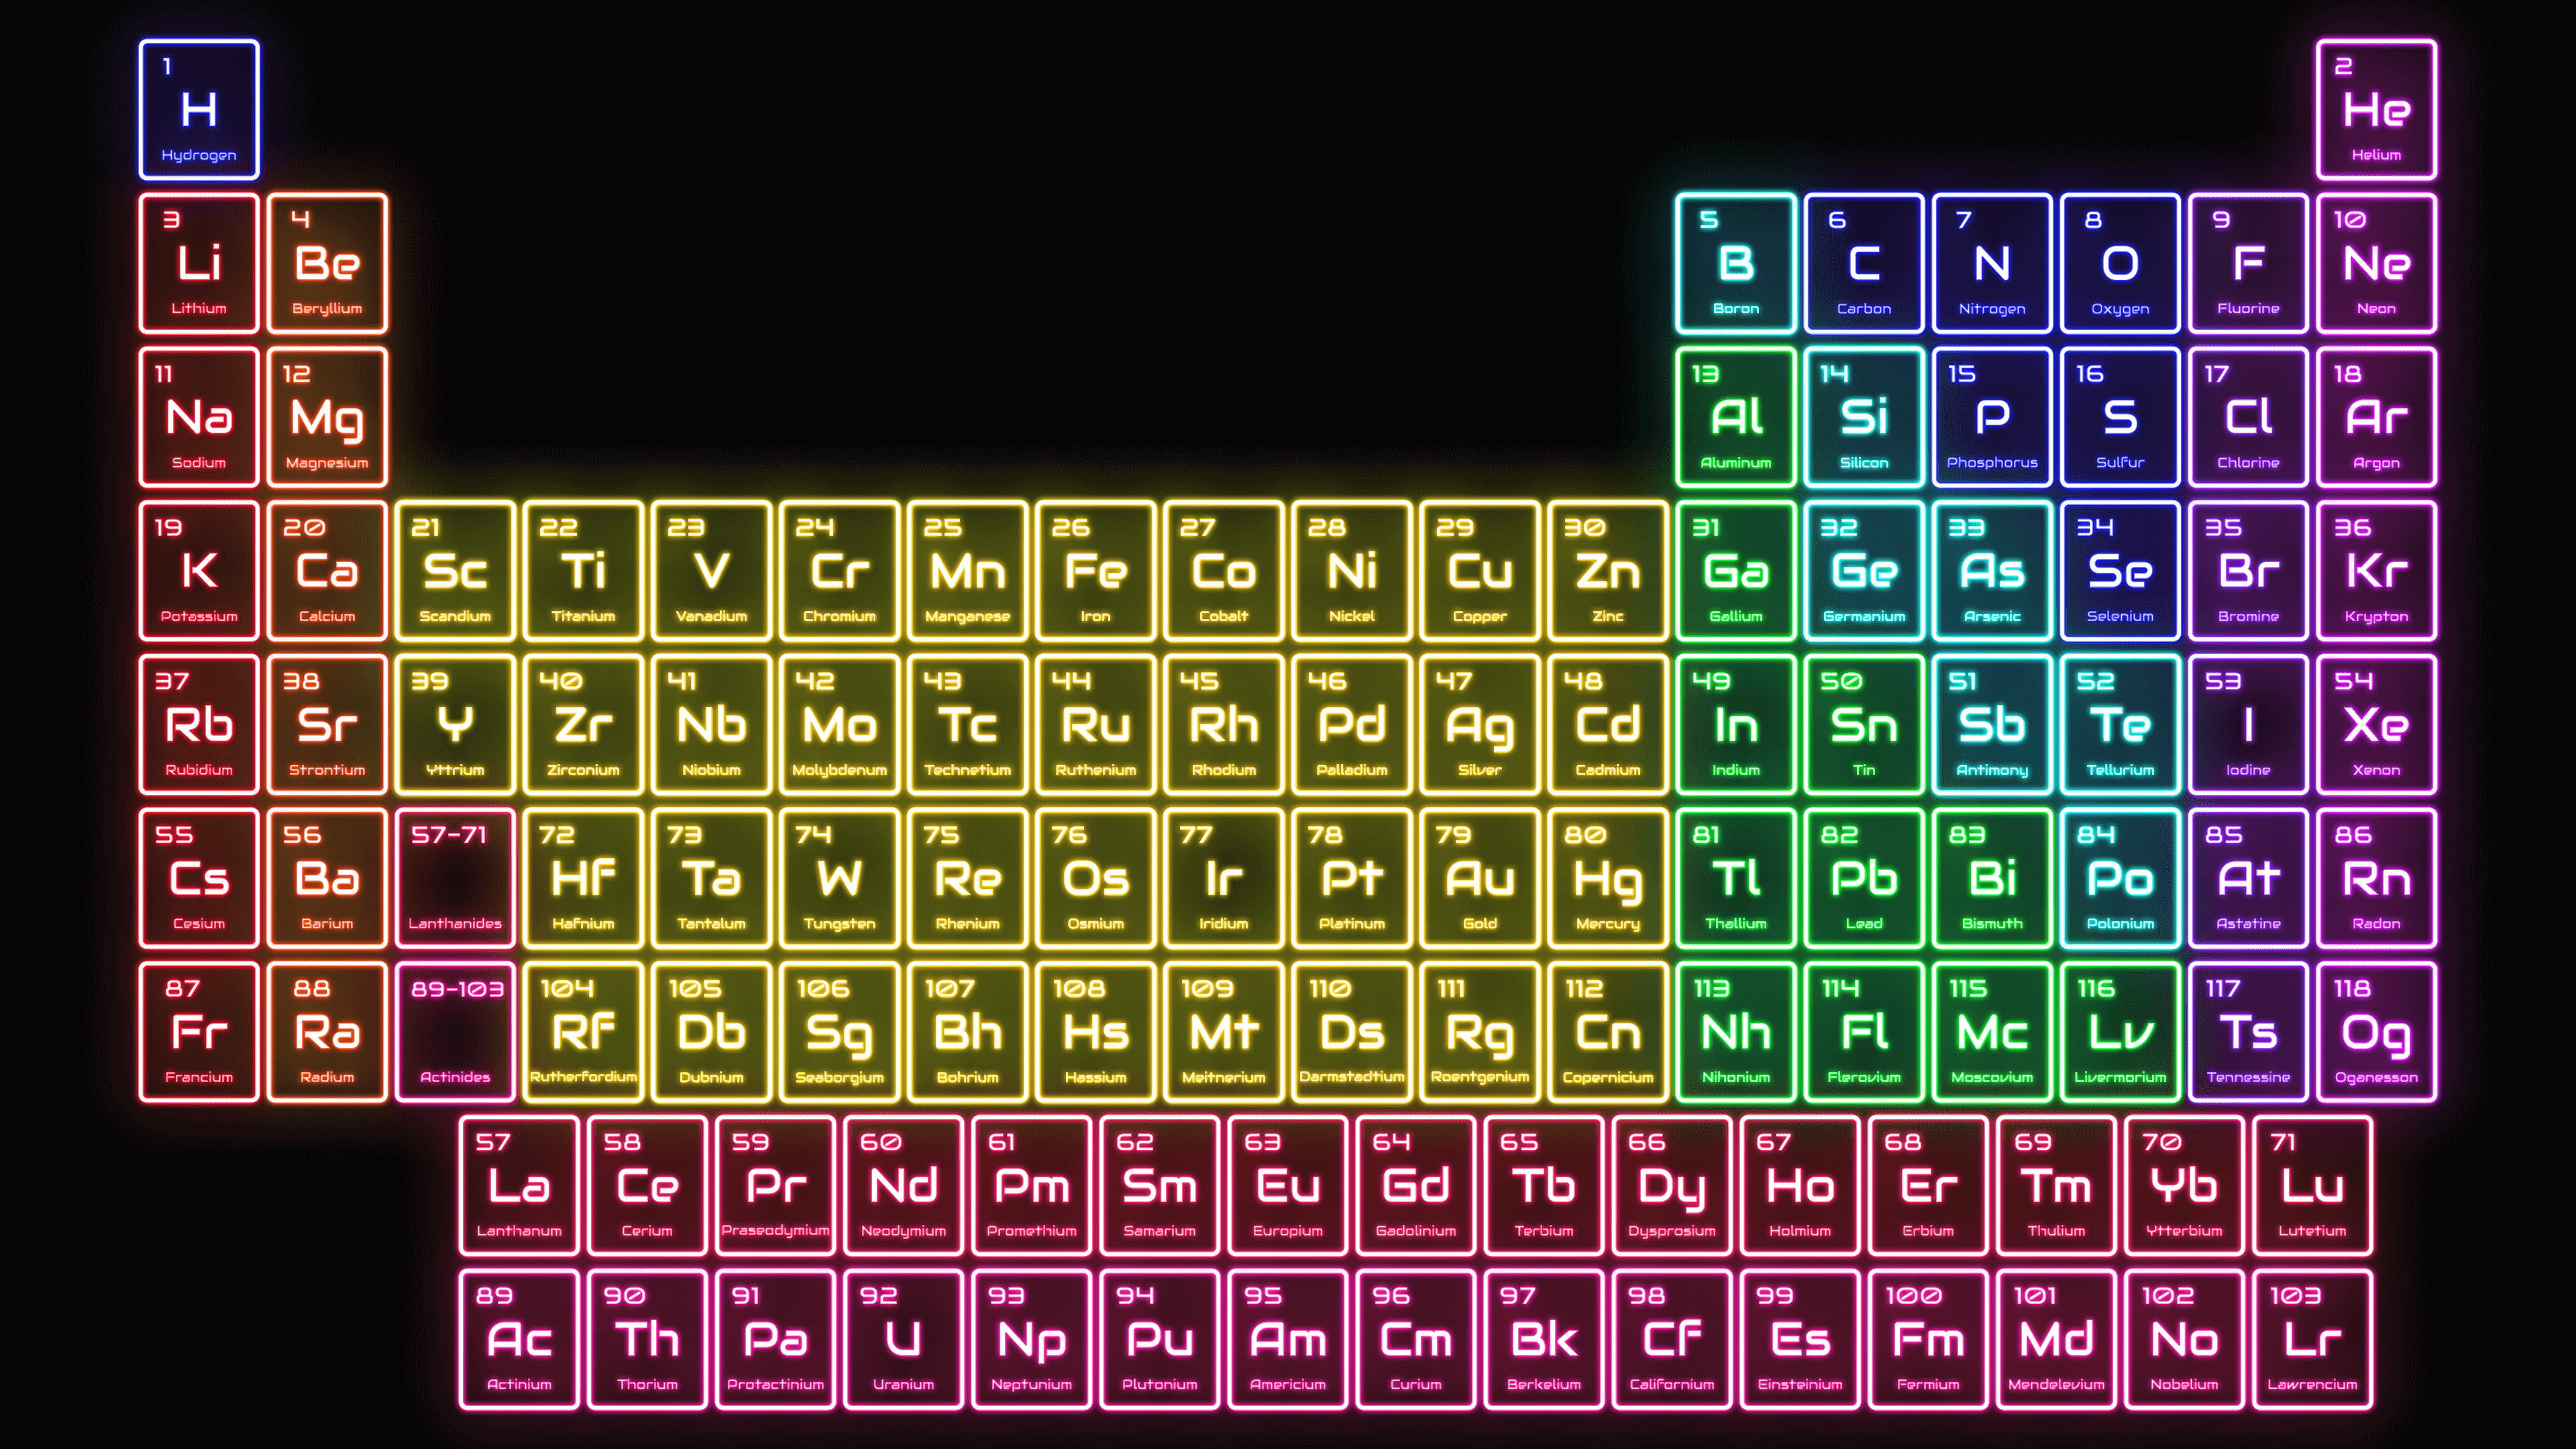 This colorful neon lights periodic table wallpaper shines brightly